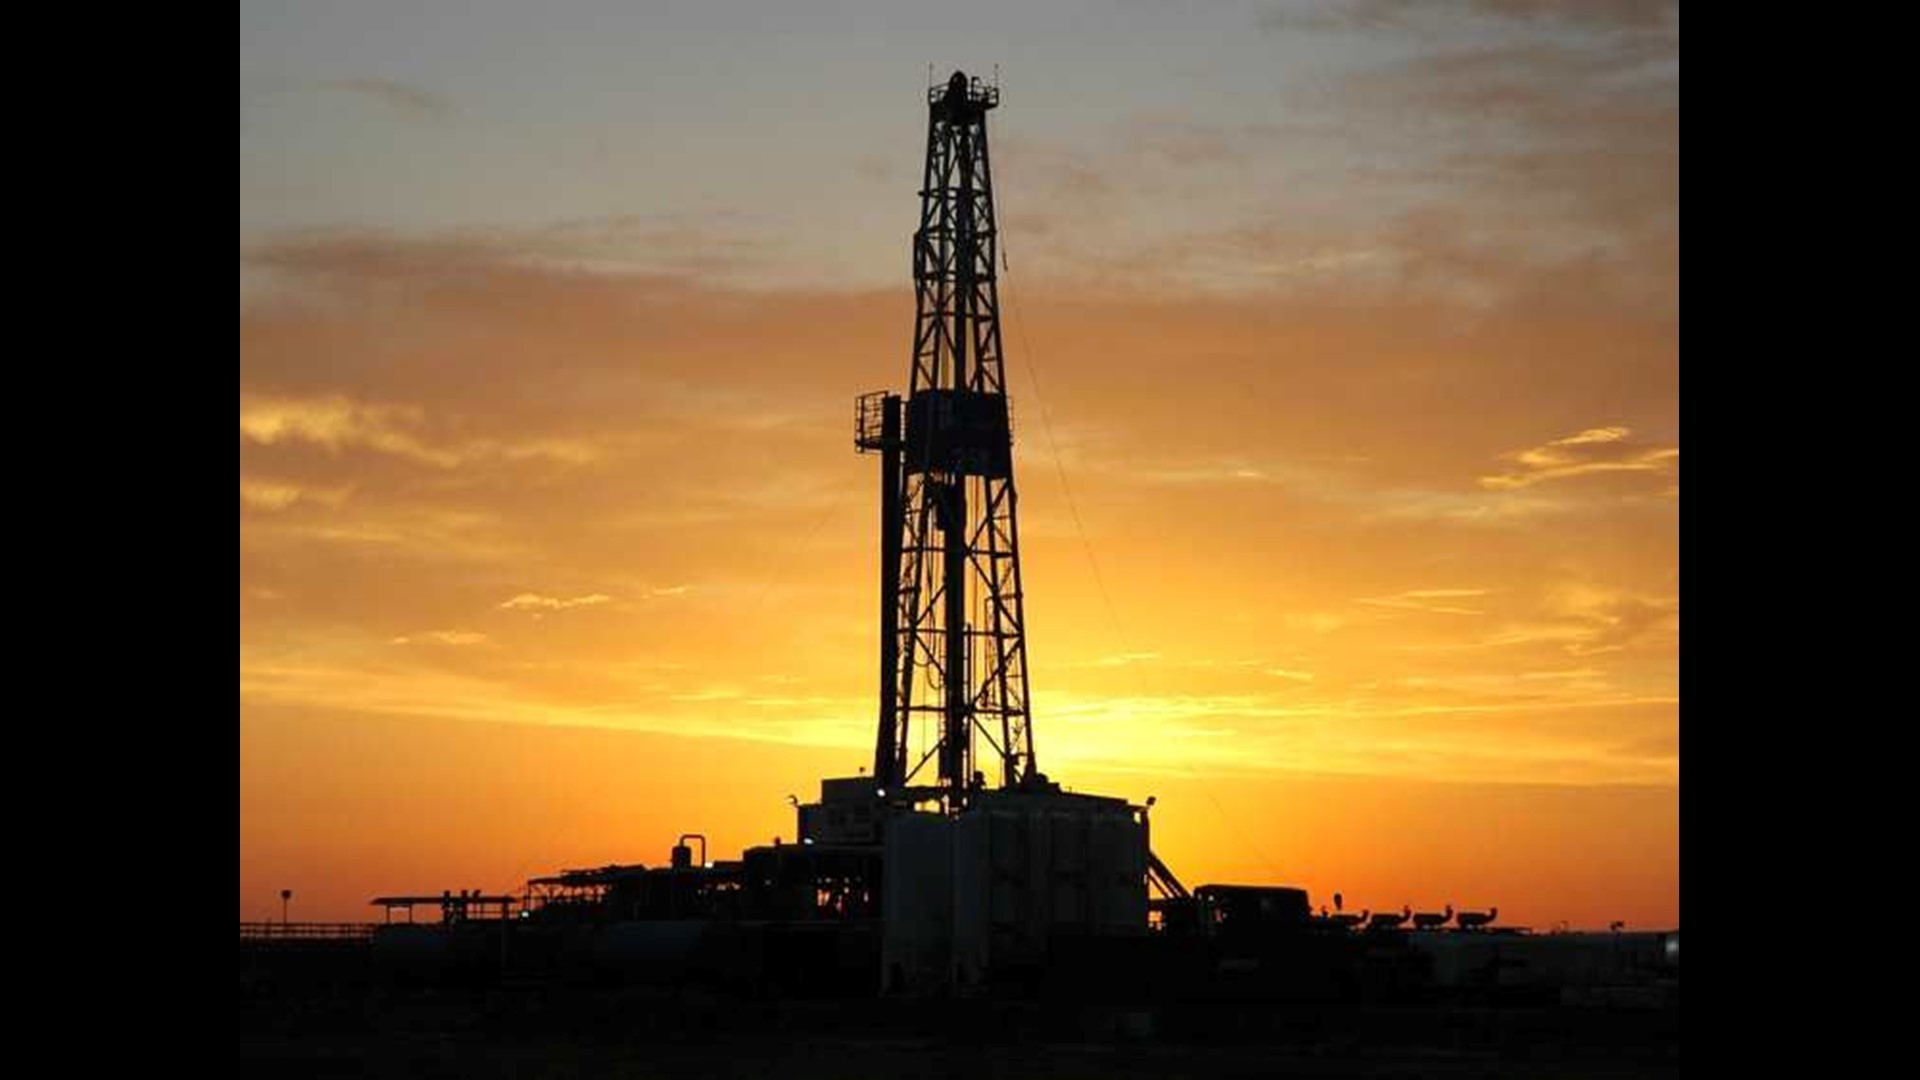 Several Workers Hurt After Oil Rig Explosion in Reeves County